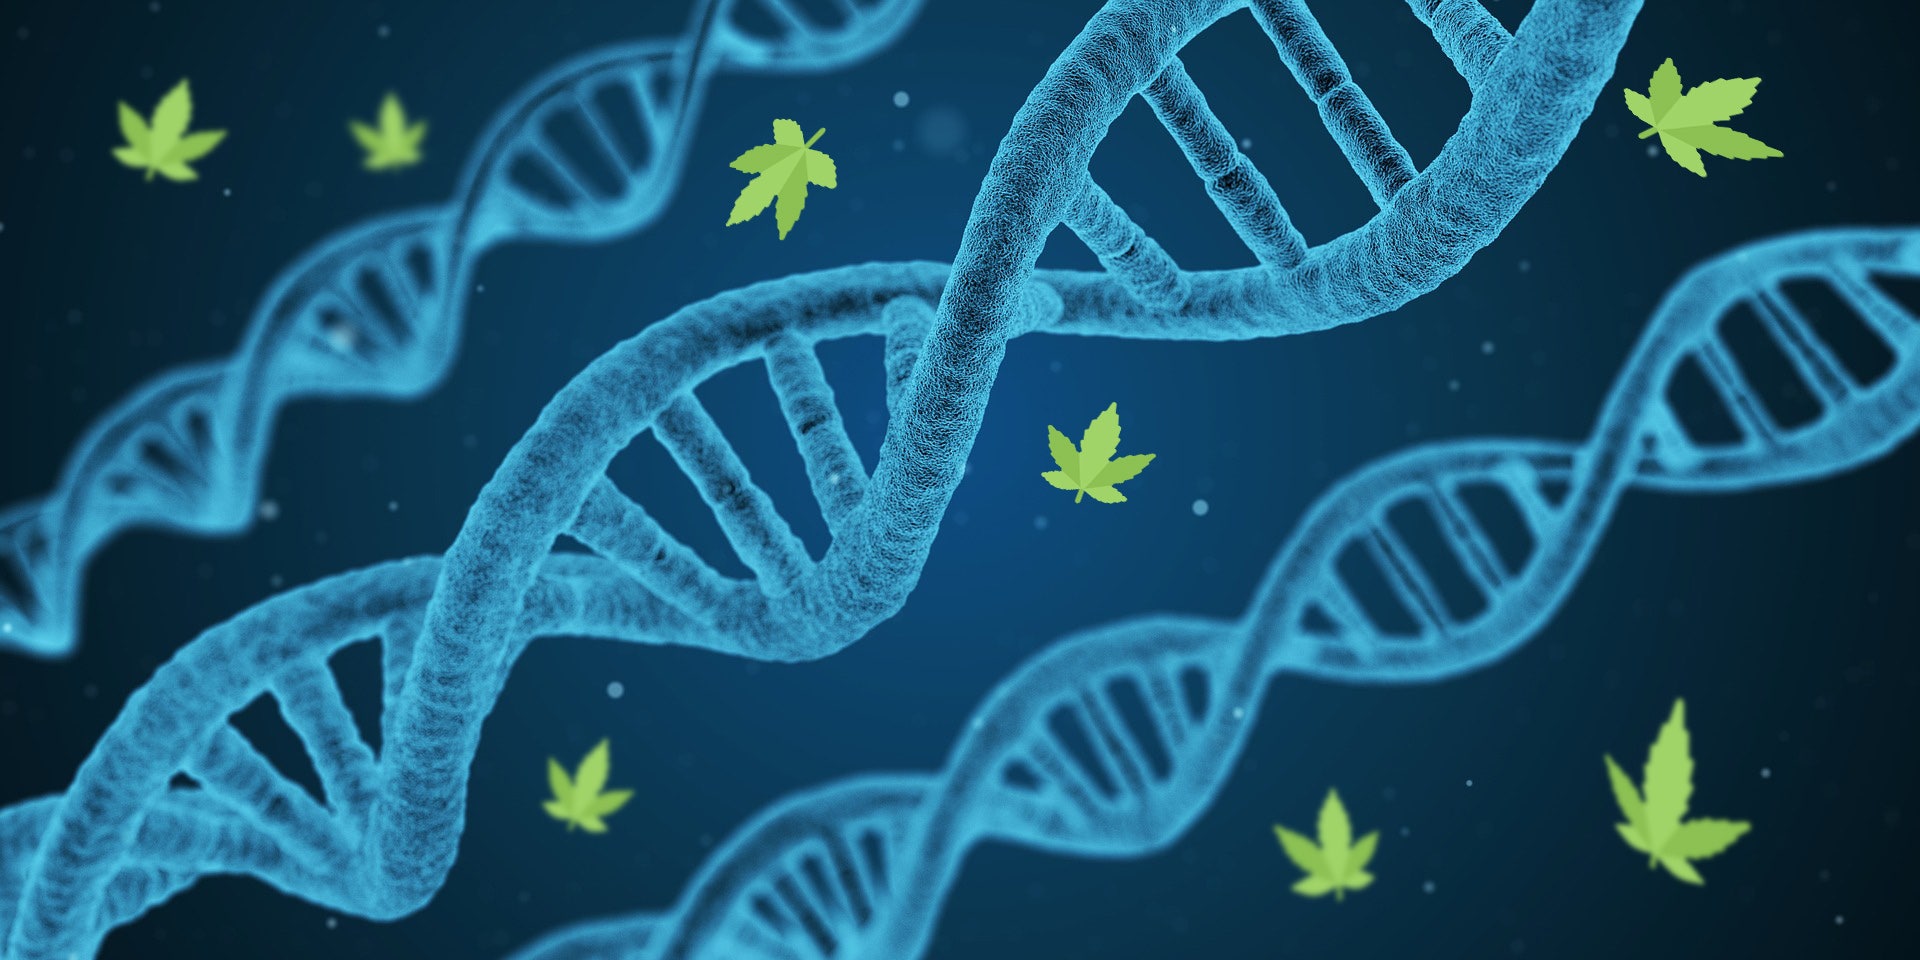 The Companies Offering DNA Testing To Find The Best Cannabis For You